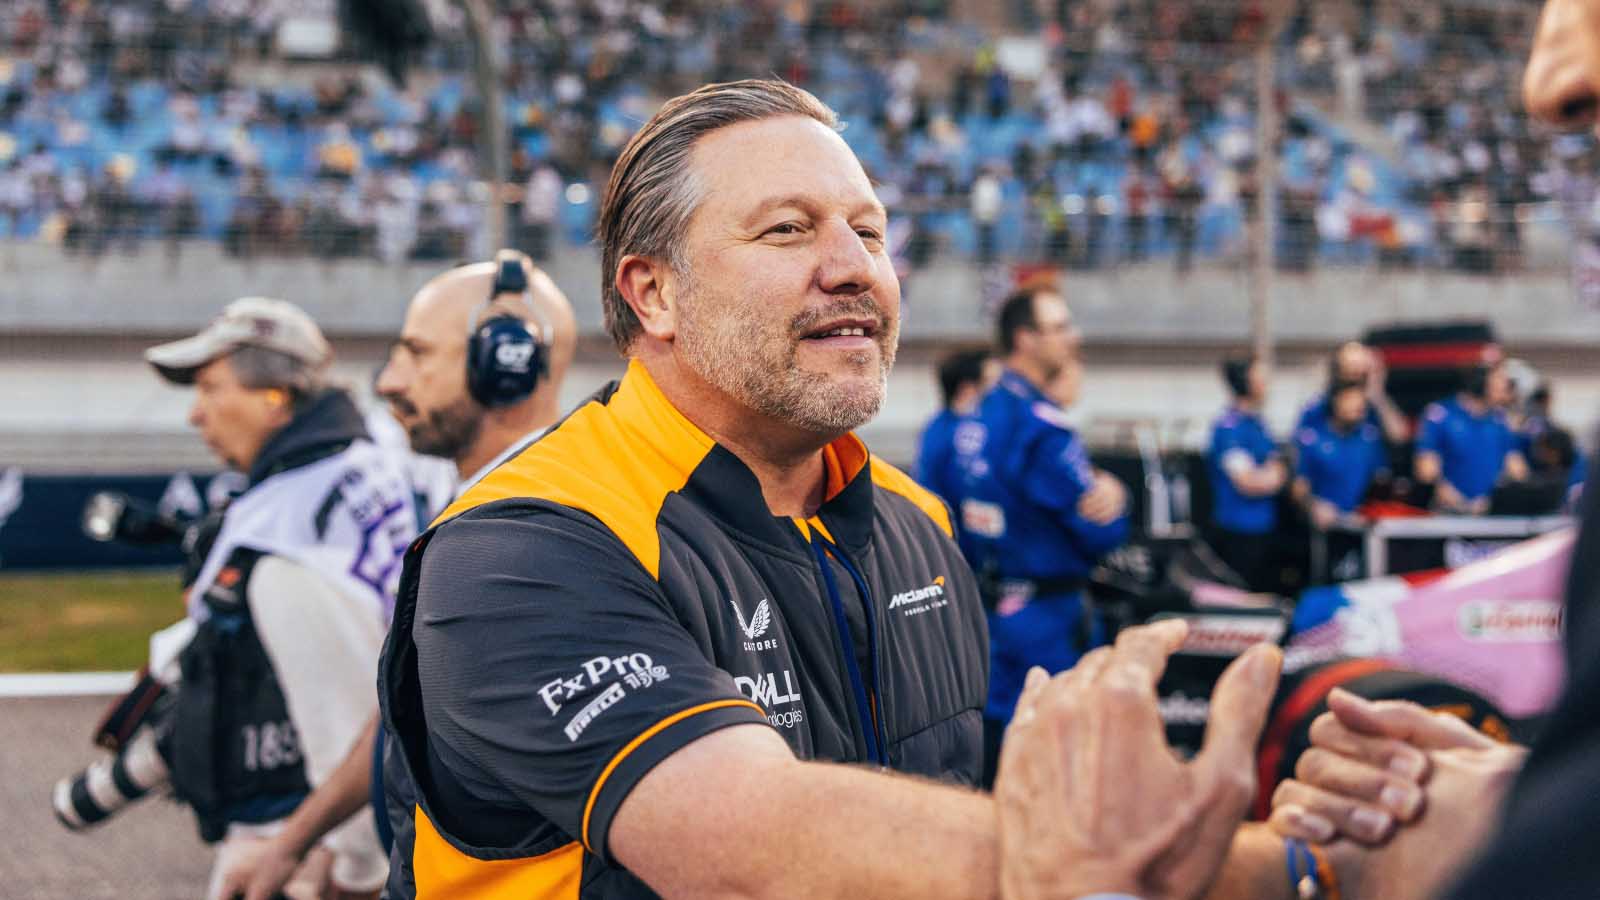 Zak Brown on the grid. Bahrain March 2022.